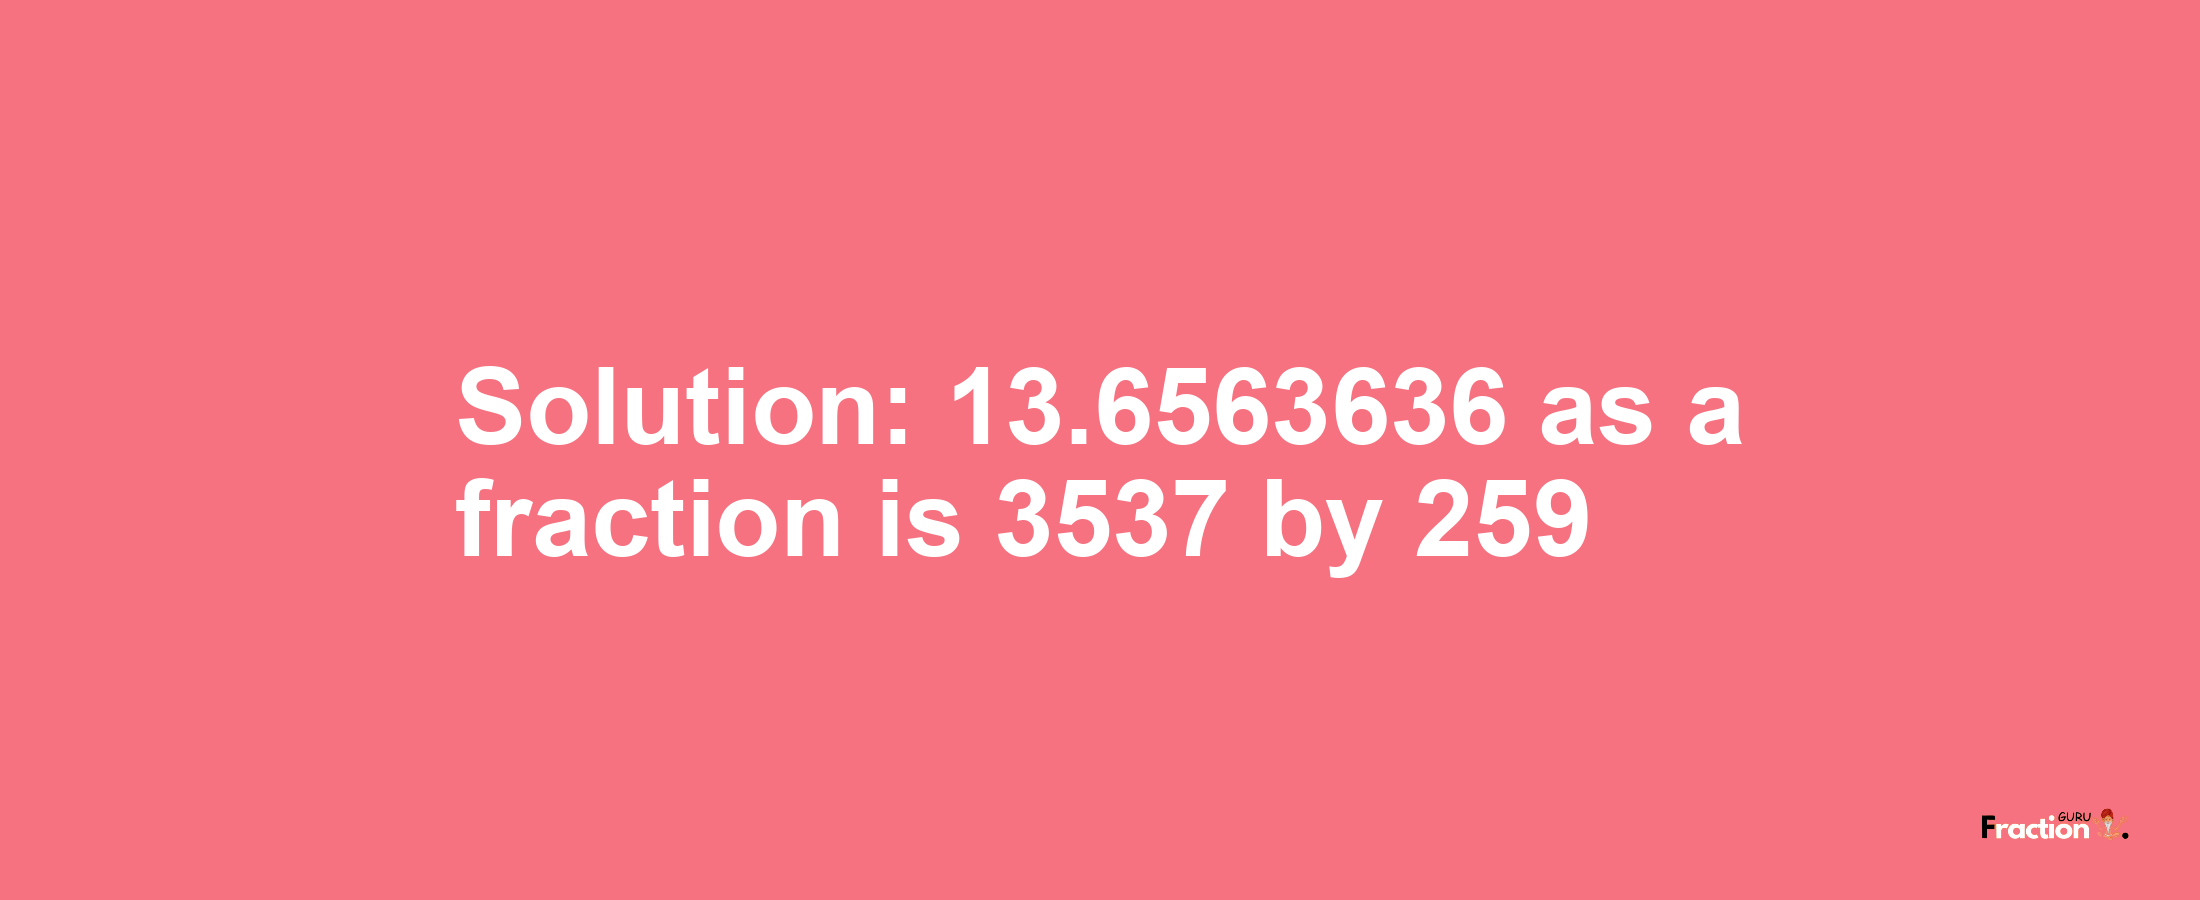 Solution:13.6563636 as a fraction is 3537/259